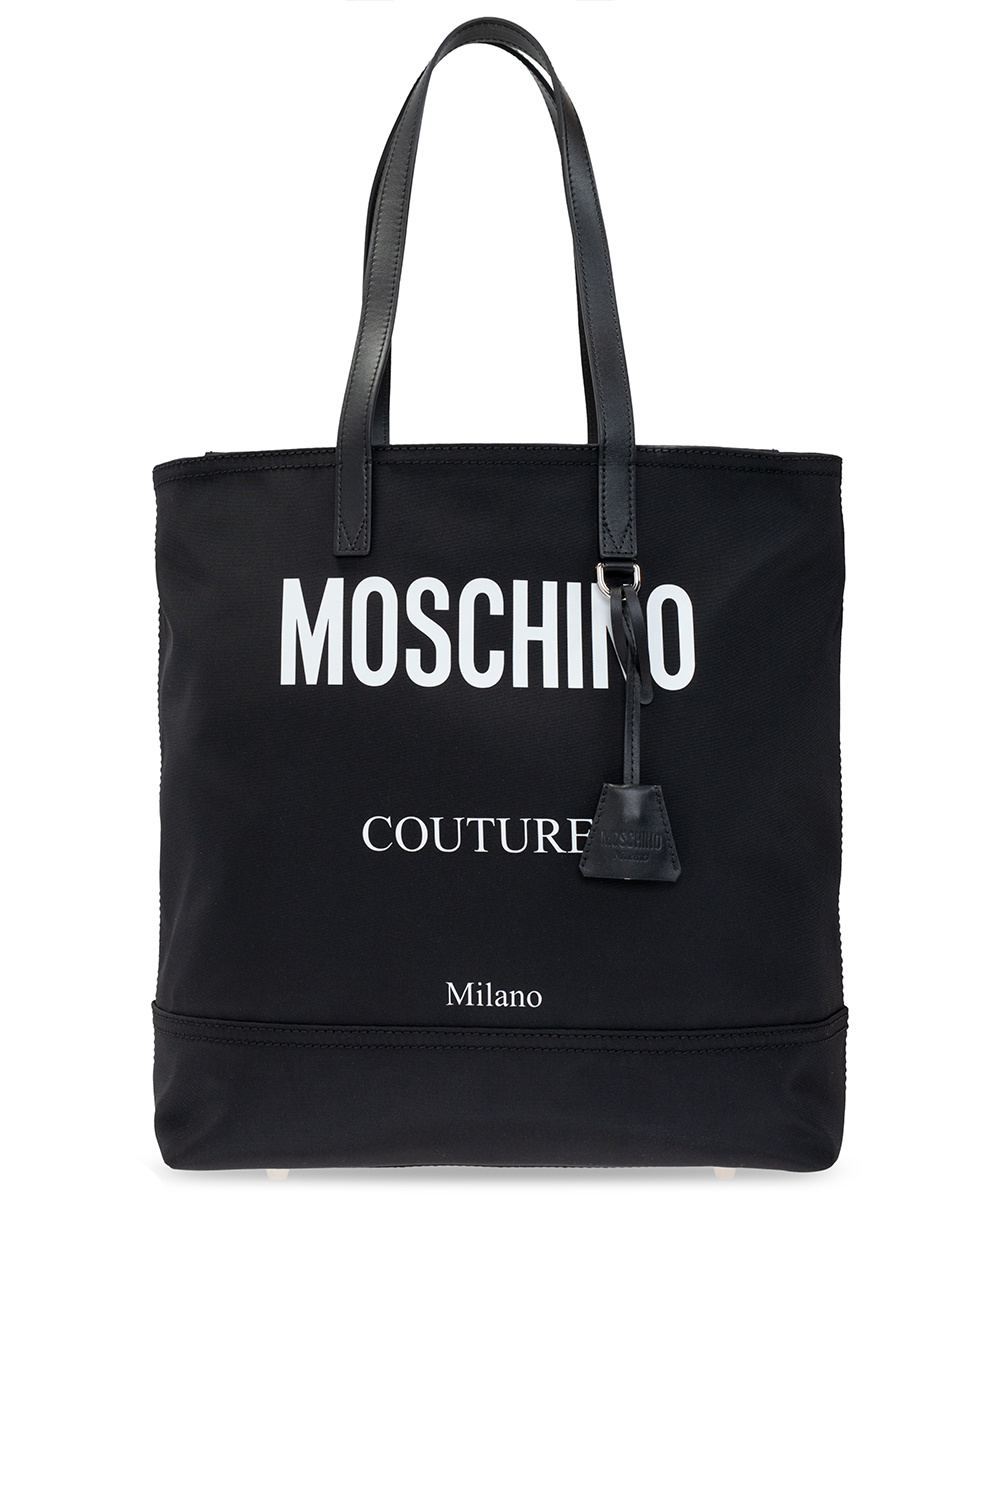 Moschino Handtasche GUESS Alby Toggle Tote HWVG74 55230 ALMOND